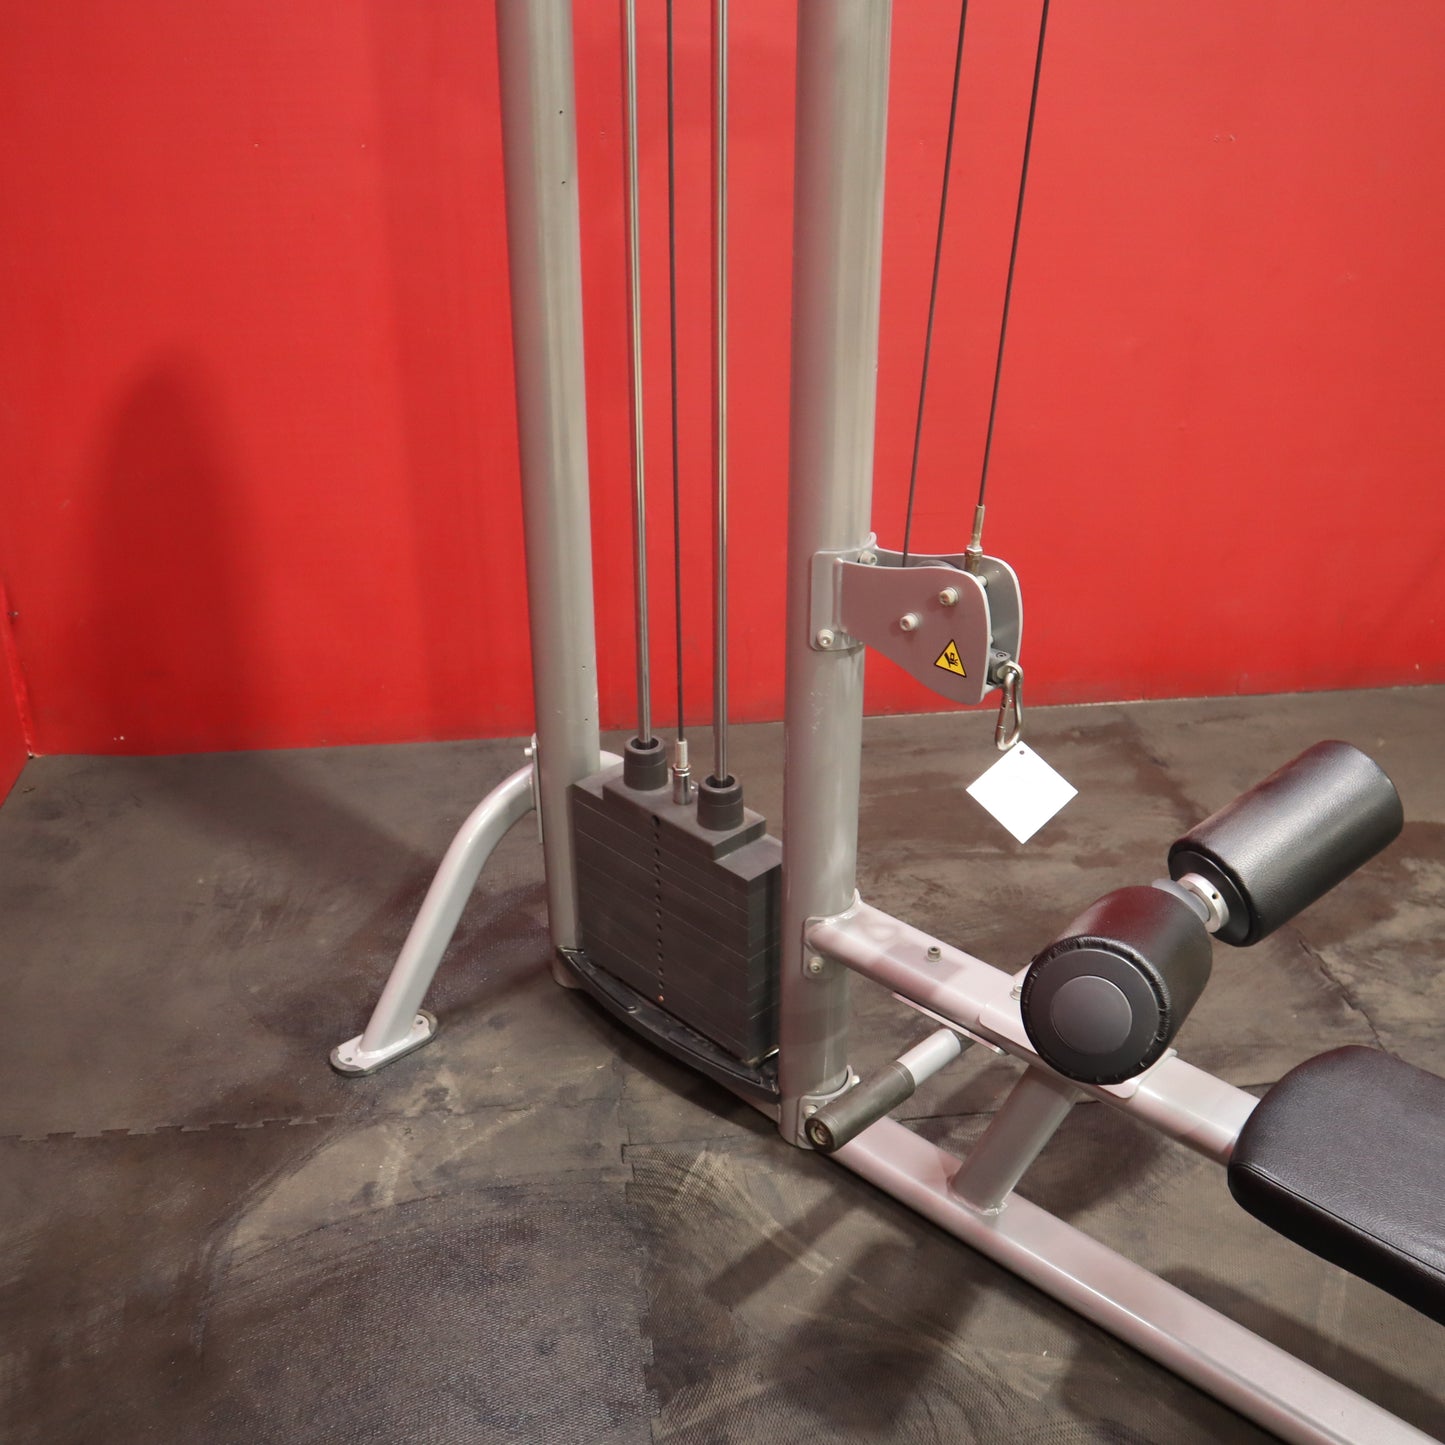 Life Fitness Optima Series Lat Pulldown/Low Row (Used)